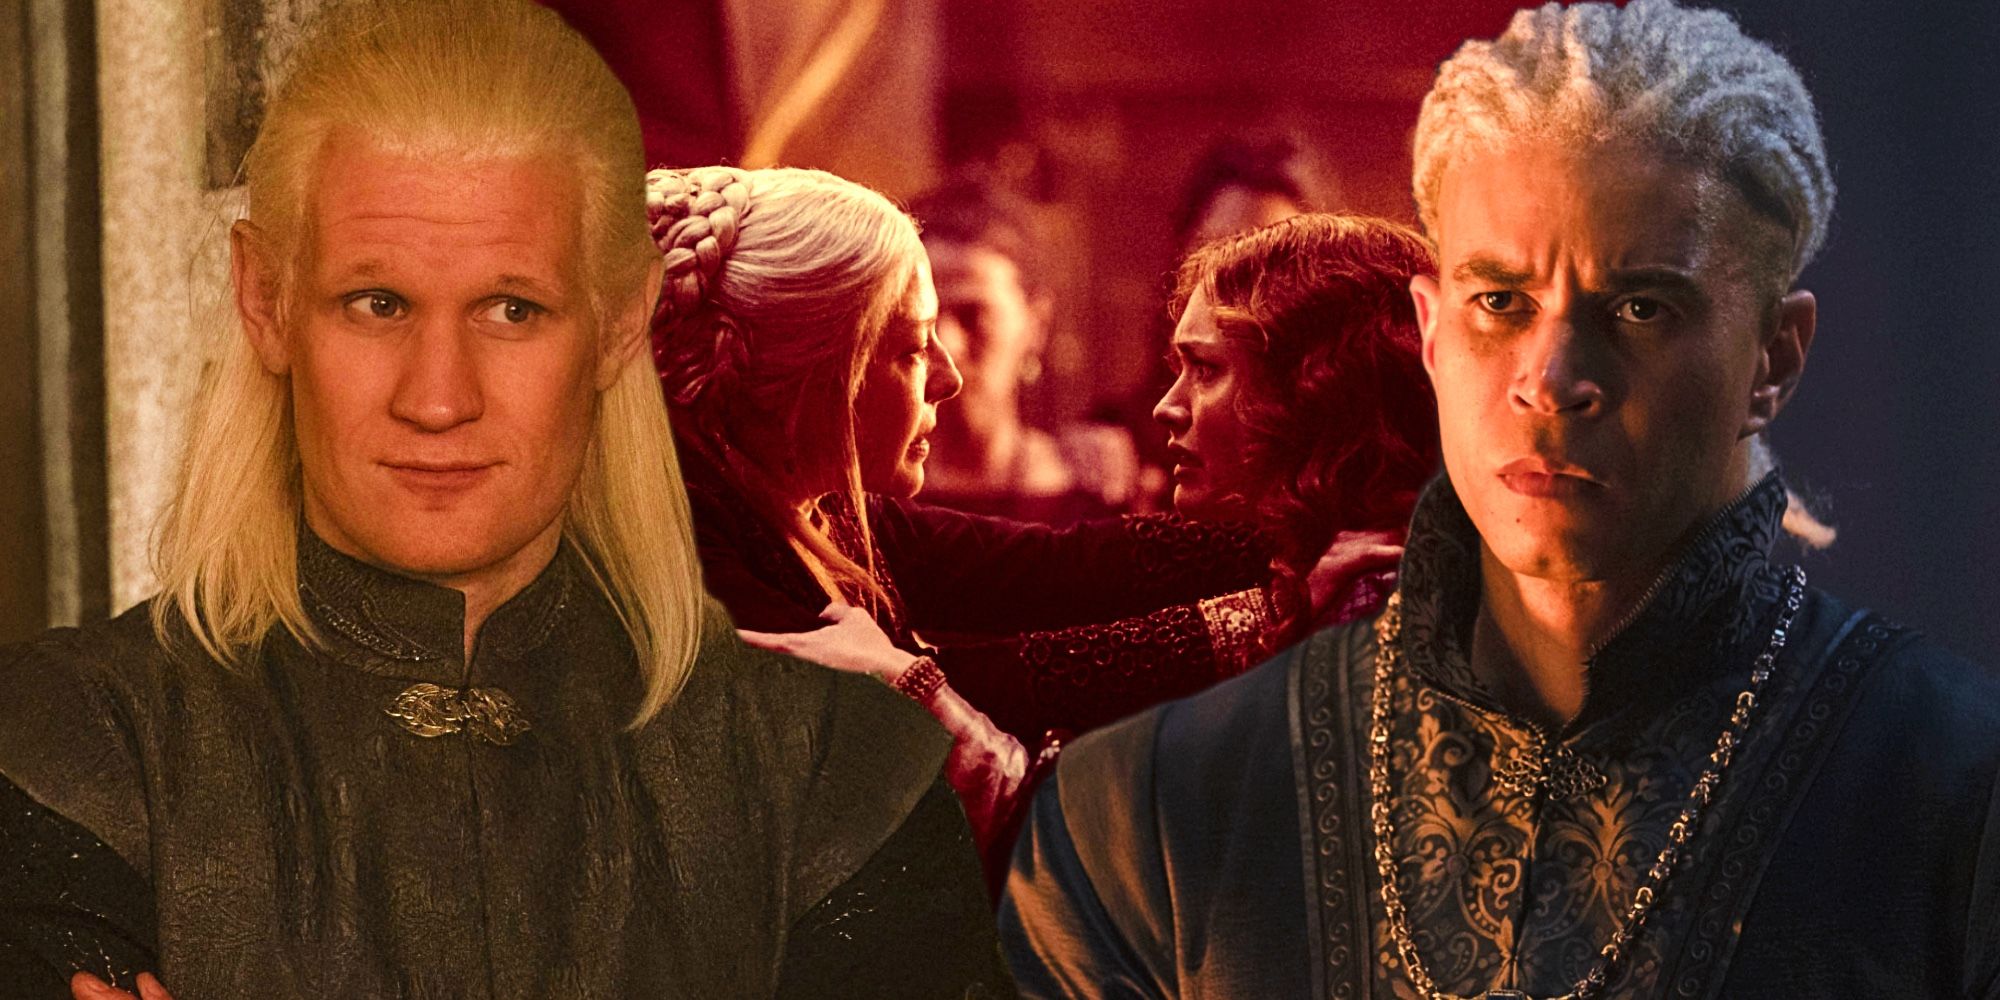 Which Targaryen kid loses his eye in House of the Dragon Episode 7?